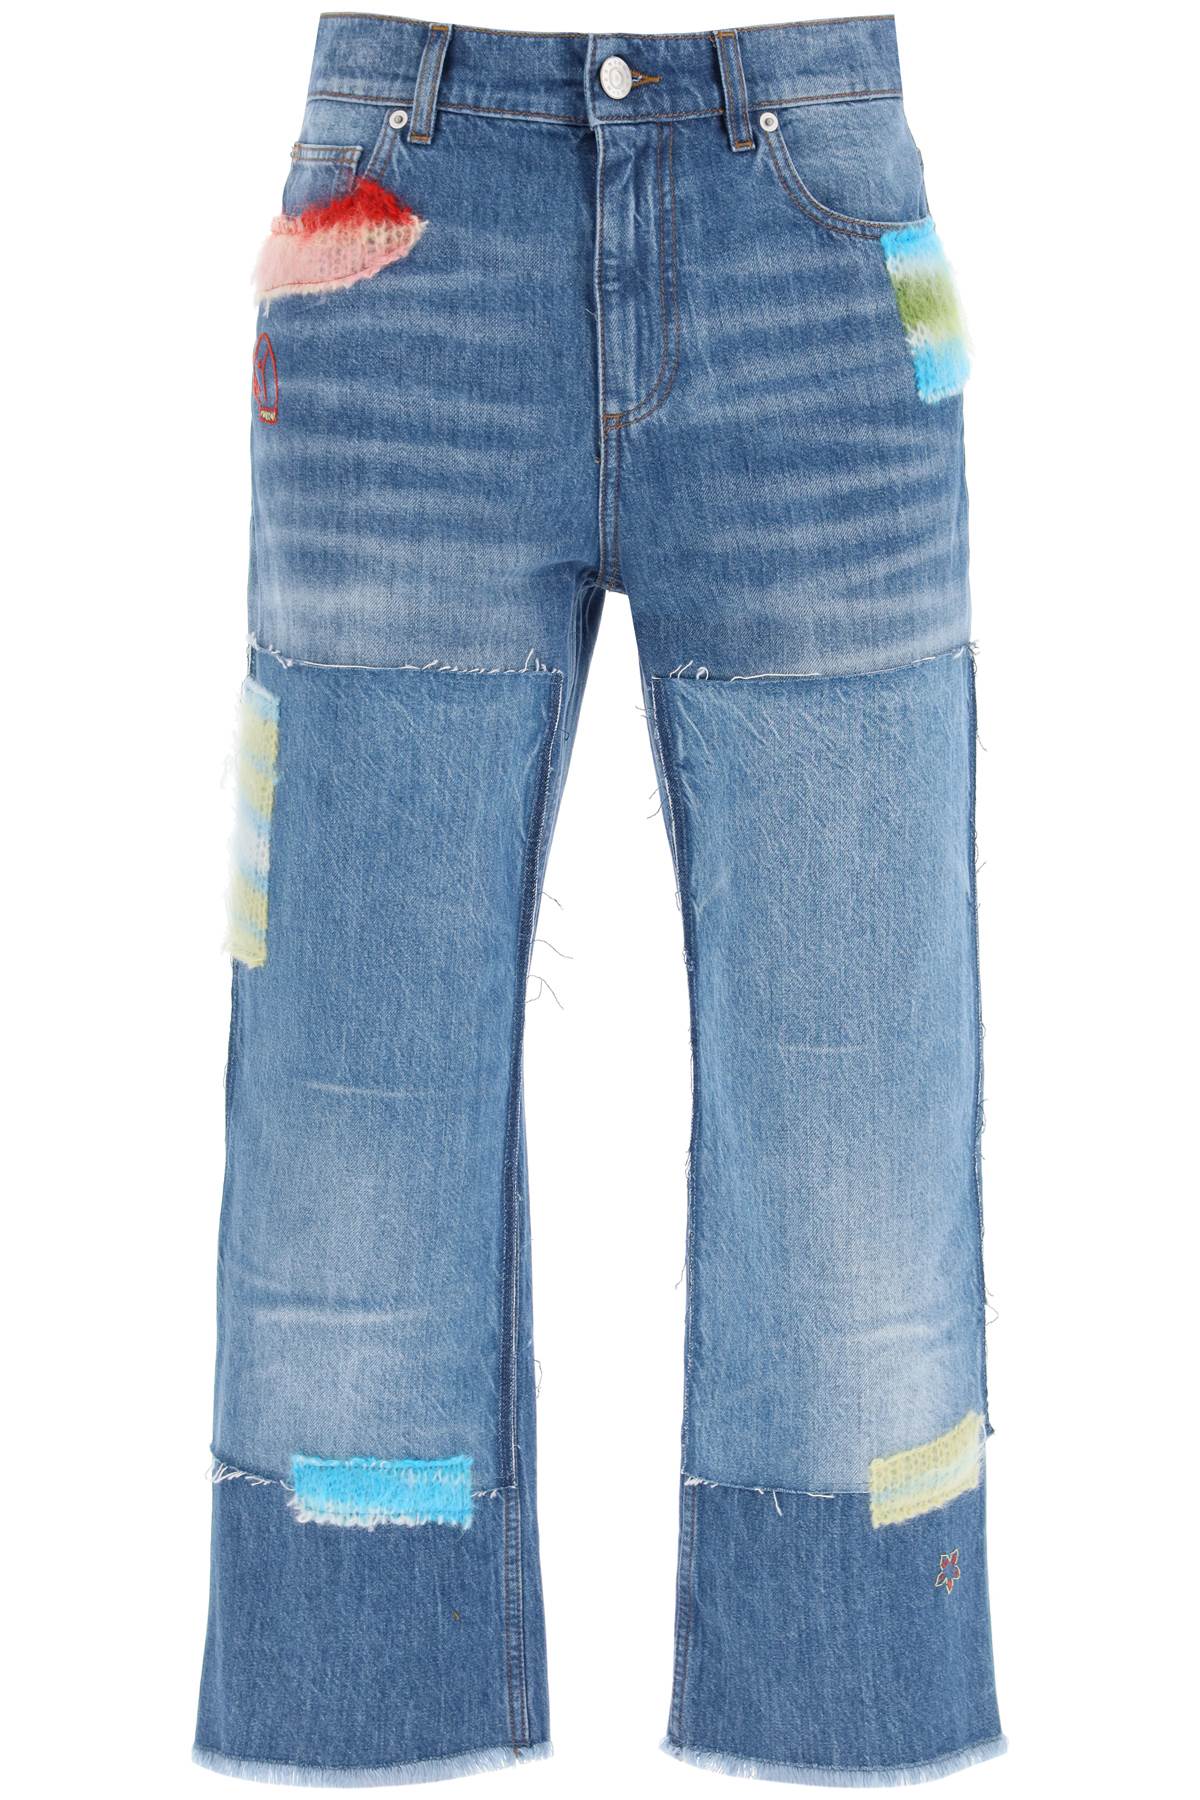 MARNI Dark Washed Cotton Denim Cropped Jeans with Mohair Inserts